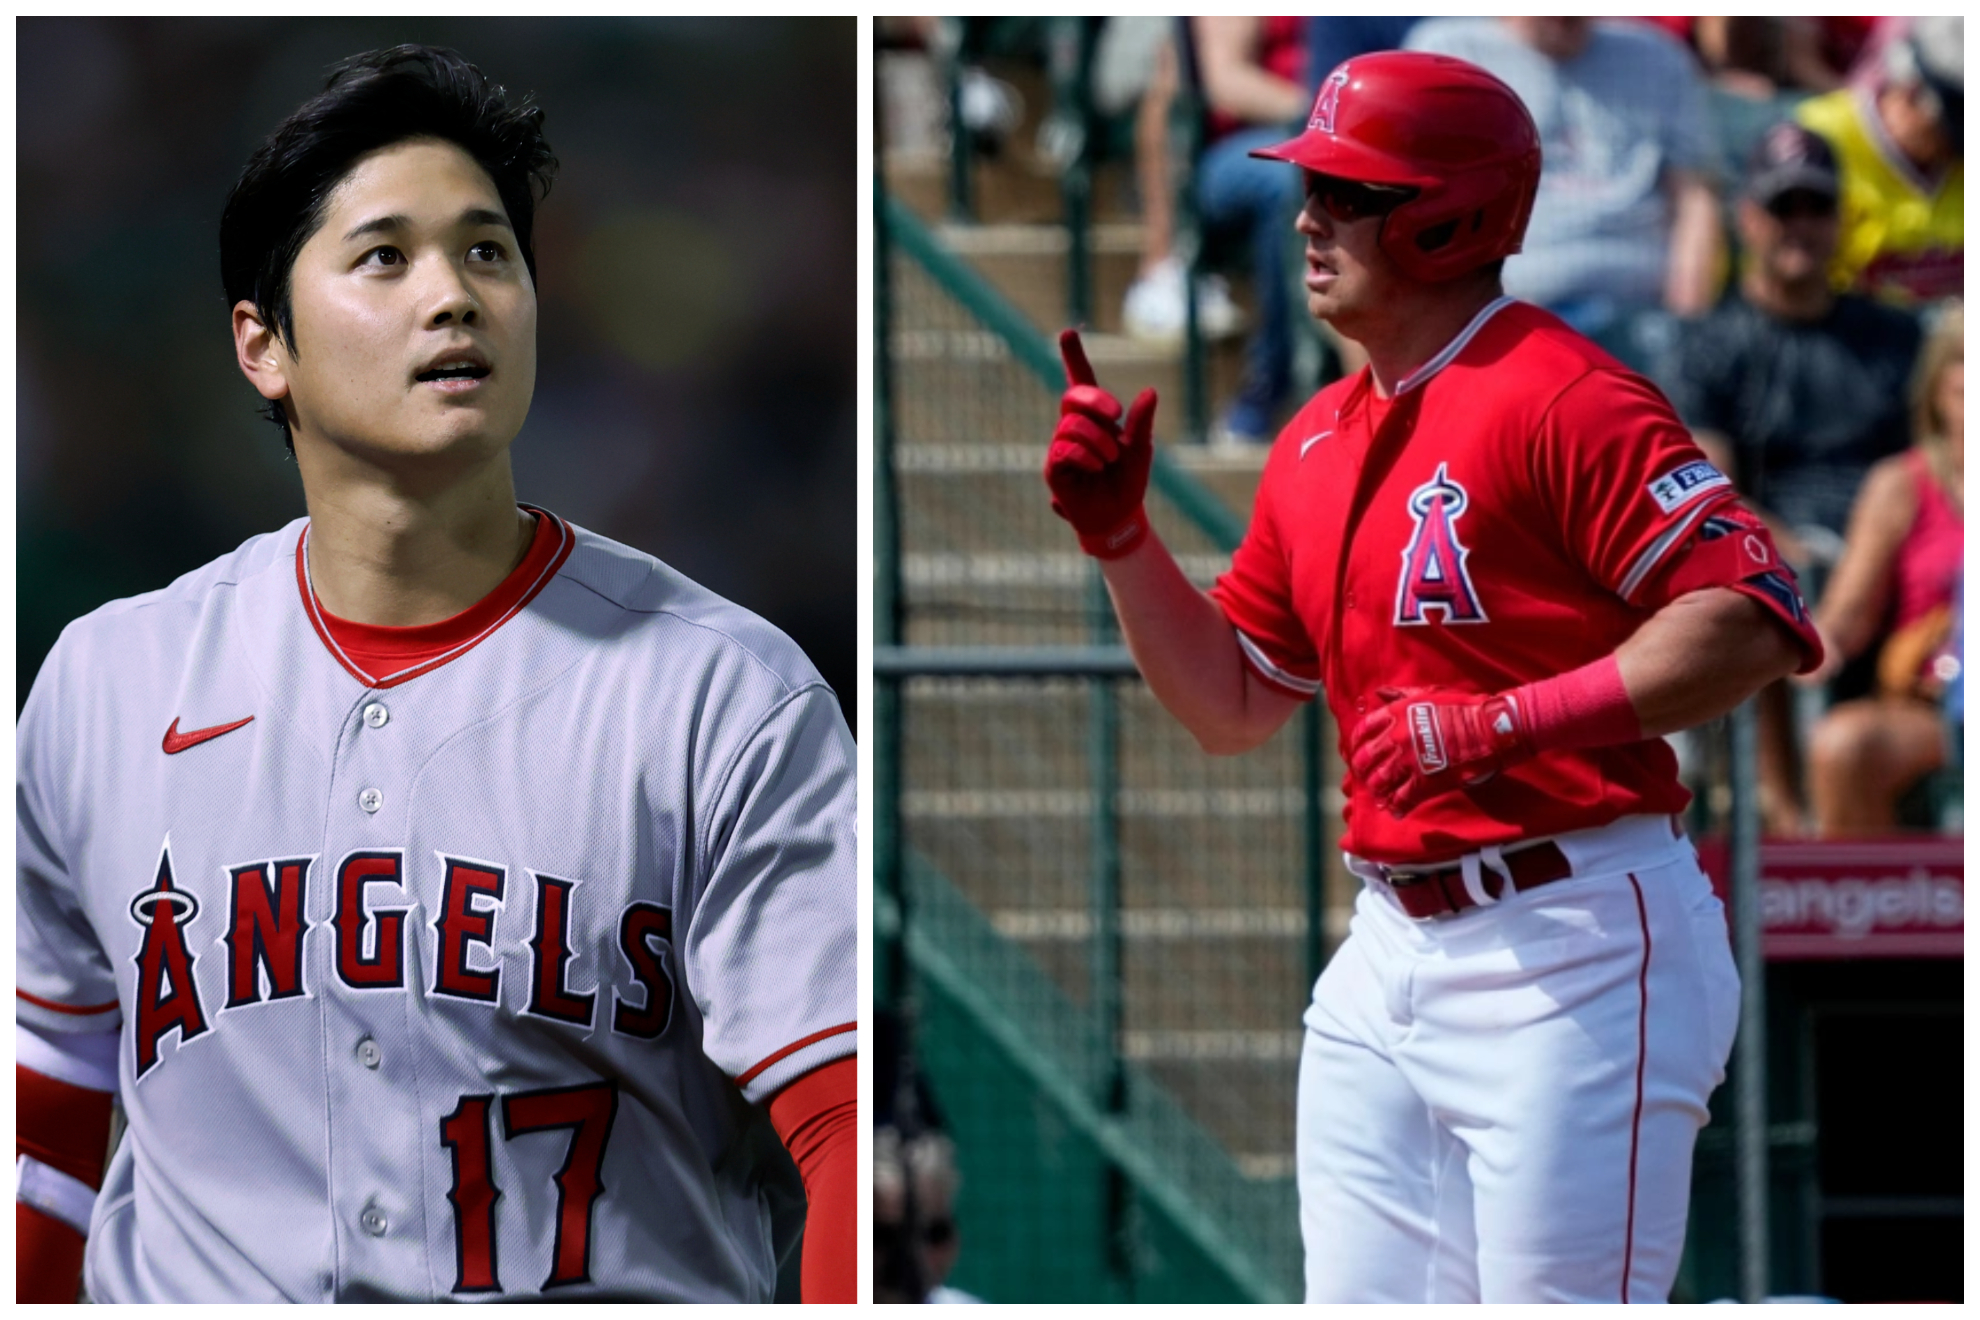 Hunter Renfroe and Shohei Ohtani lost on Opening Day against the As.